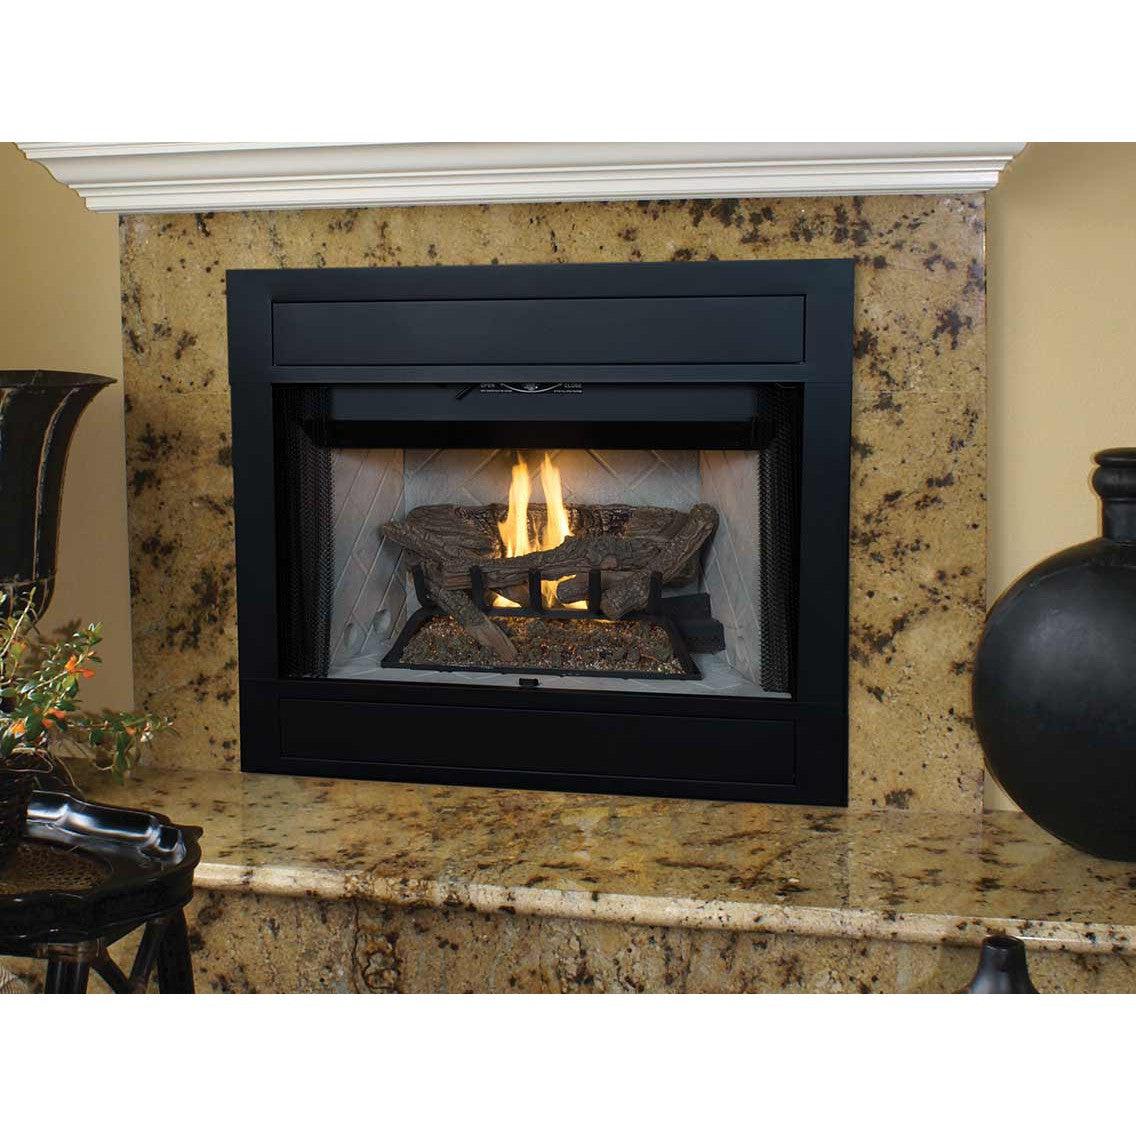 Superior BRT4536 36" Traditional B-Vent Propane Gas Fireplace With Millivolt Ignition and White Herringbone Refractory Panels